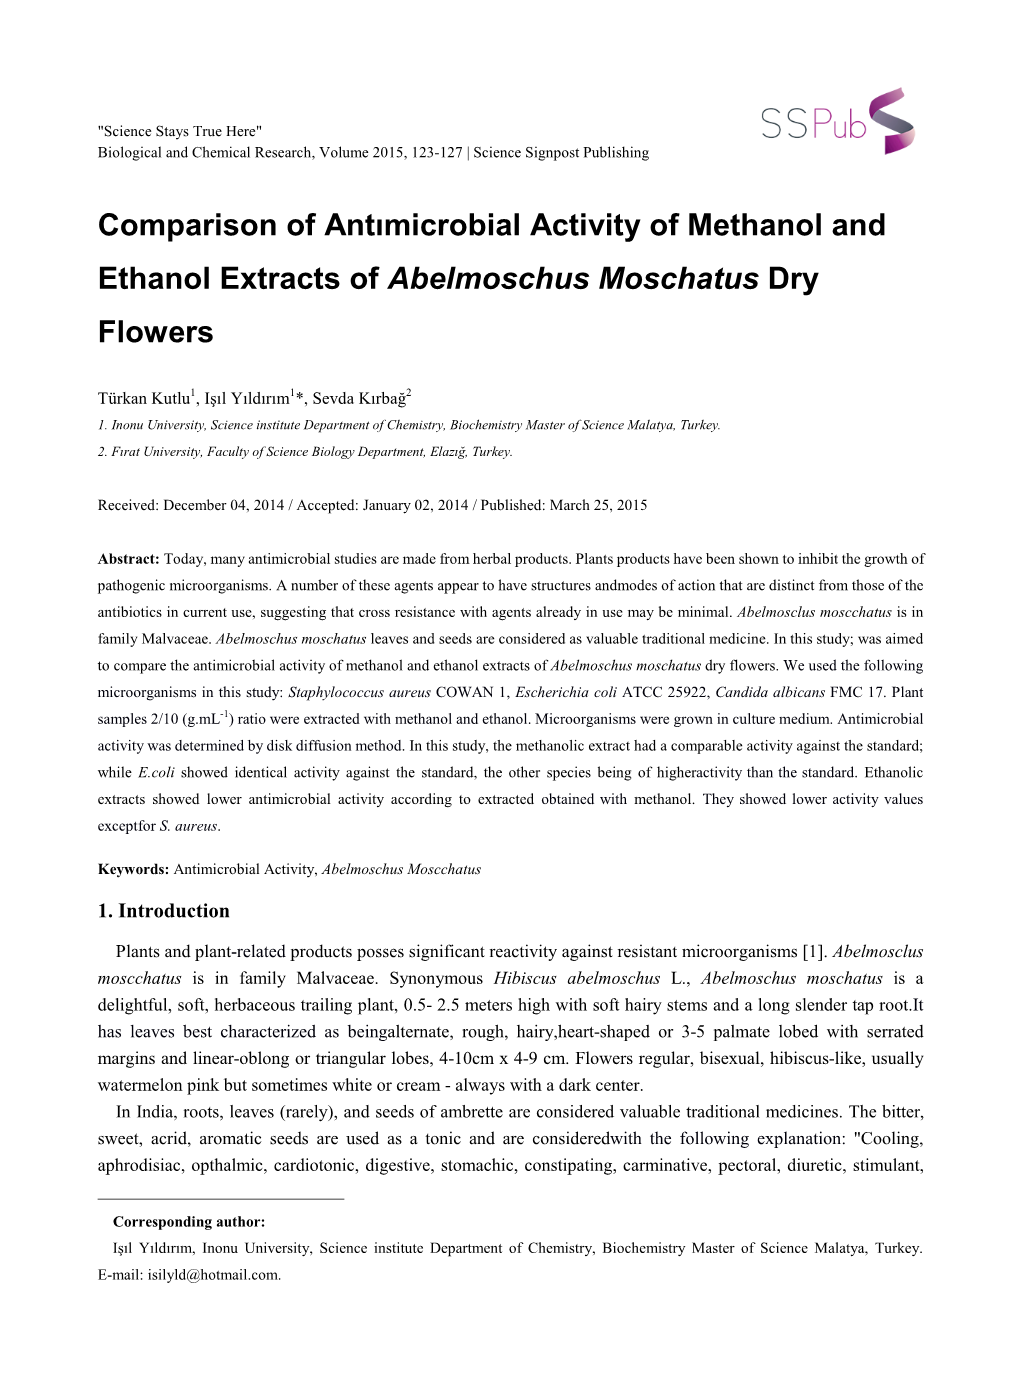 Comparison of Antımicrobial Activity of Methanol and Ethanol Extracts of Abelmoschus Moschatus Dry Flowers